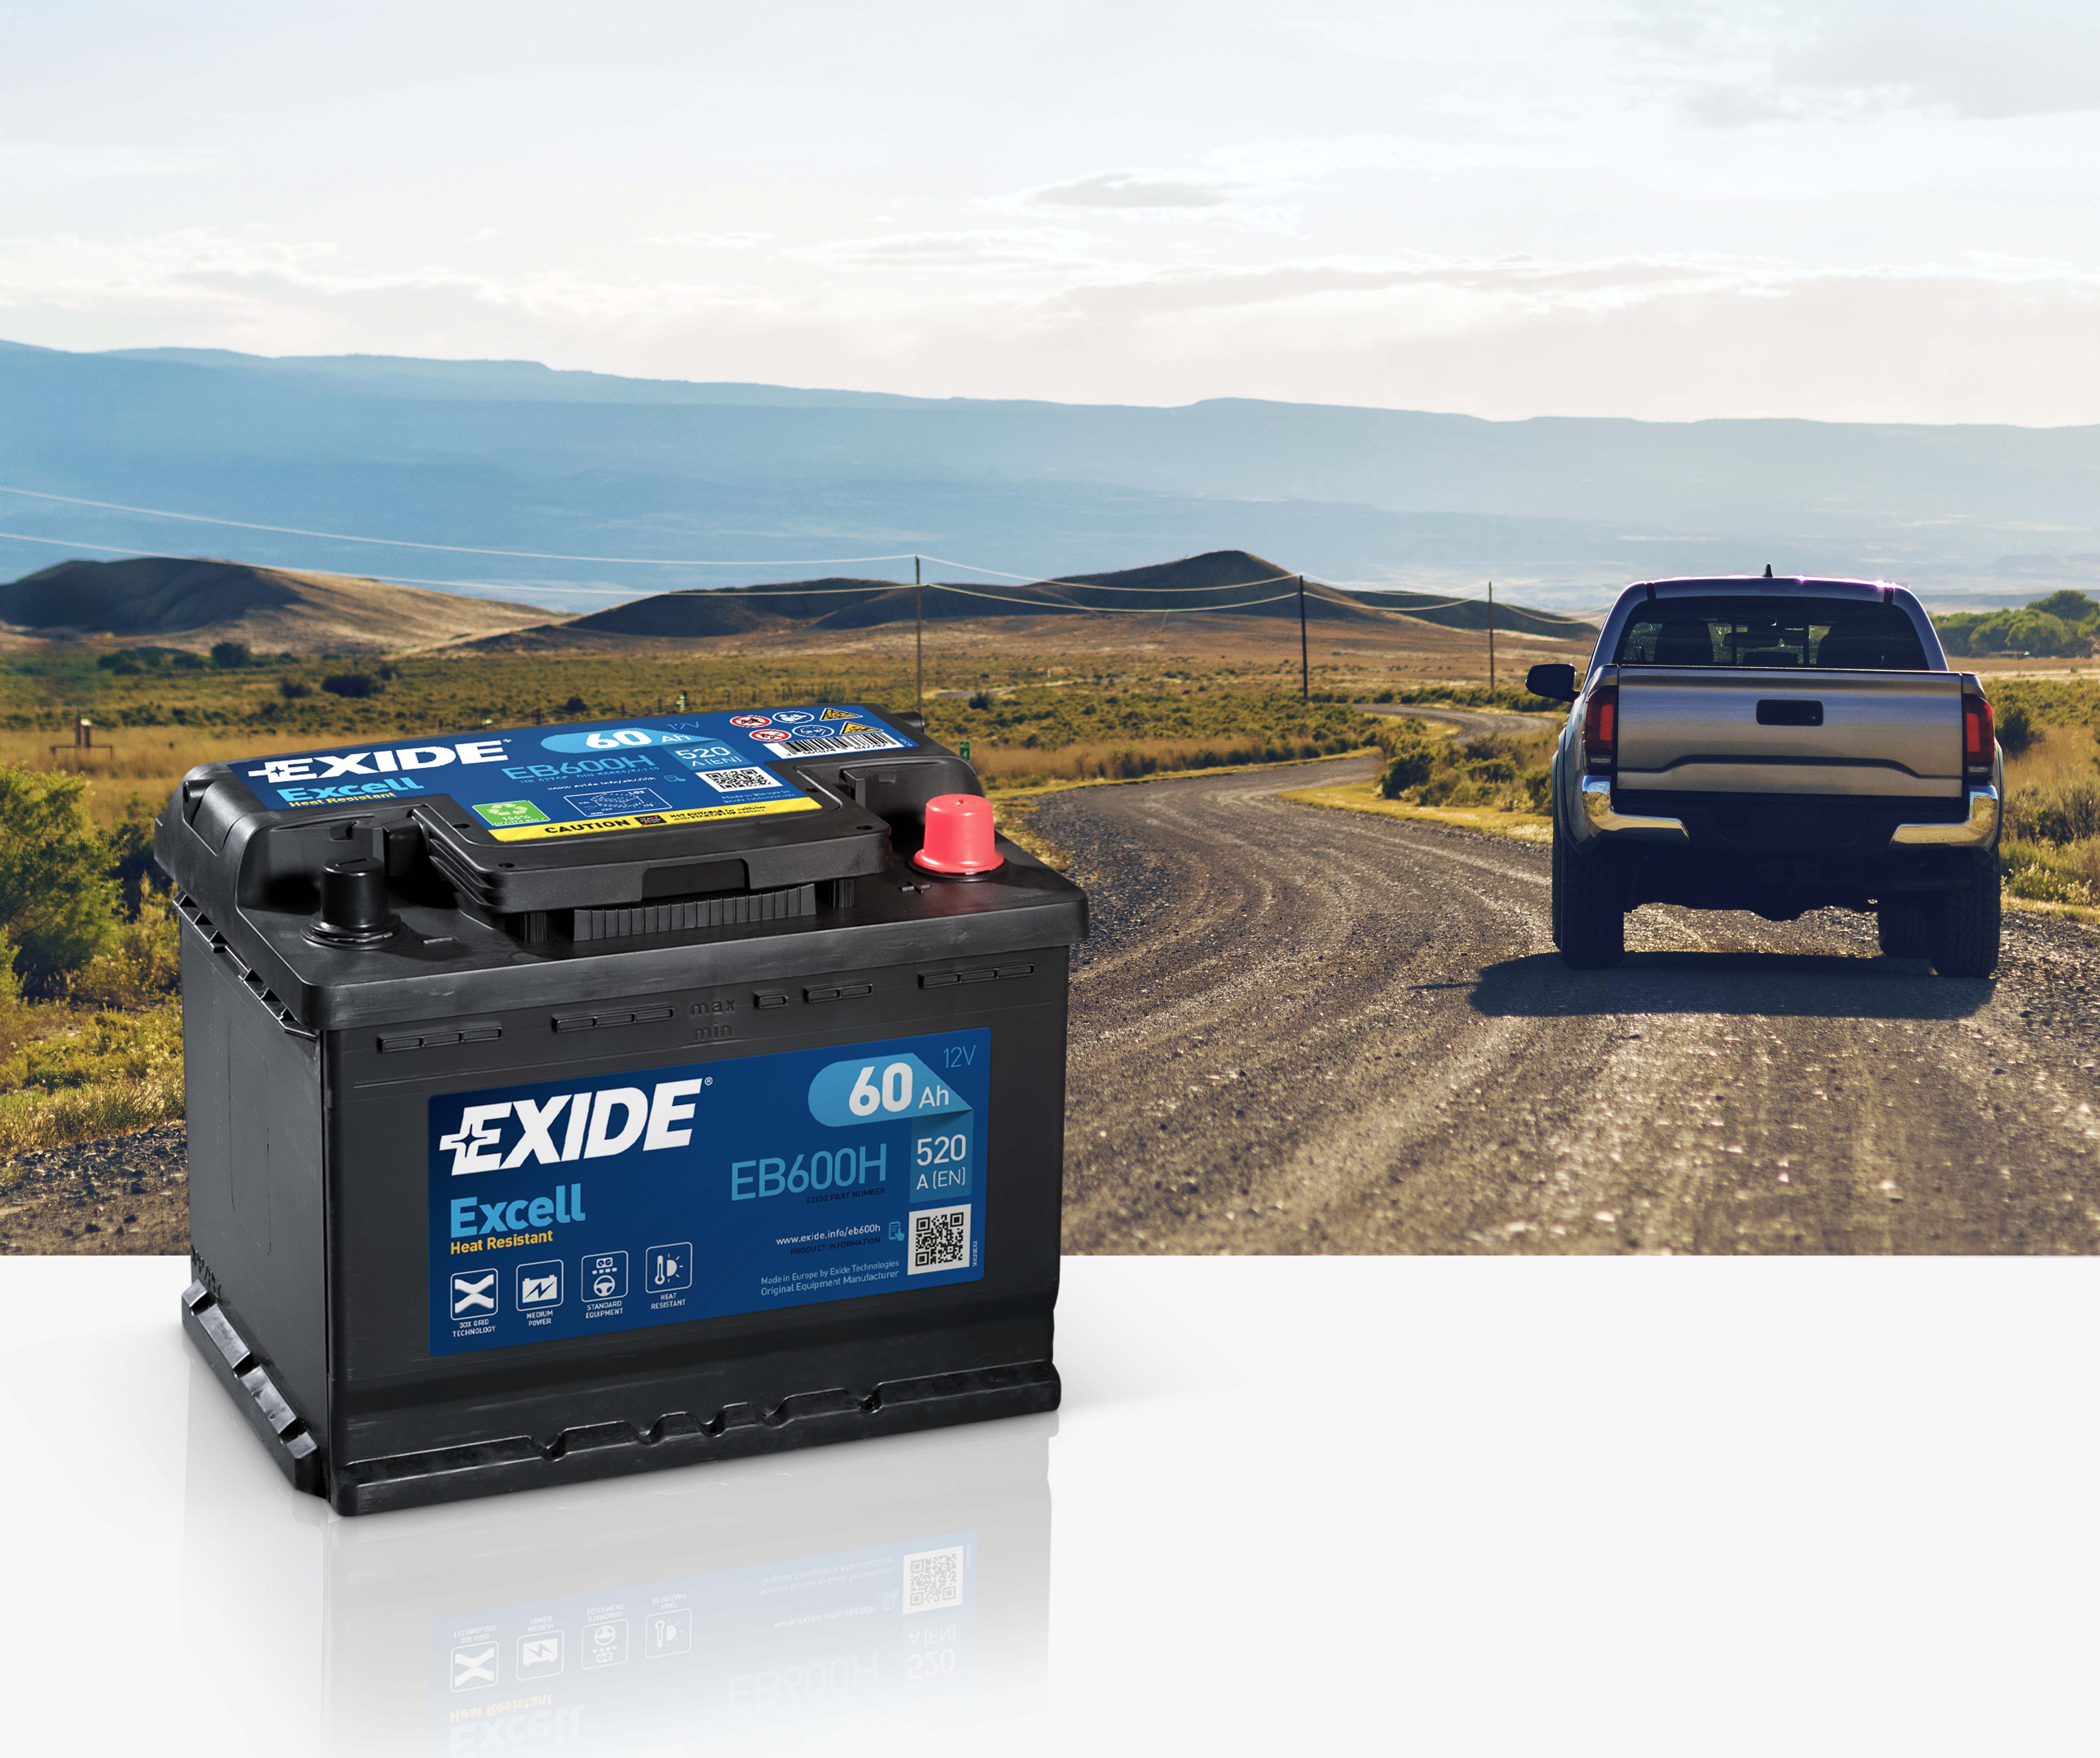 Standing up to the heat! Exide extends its Excell car battery